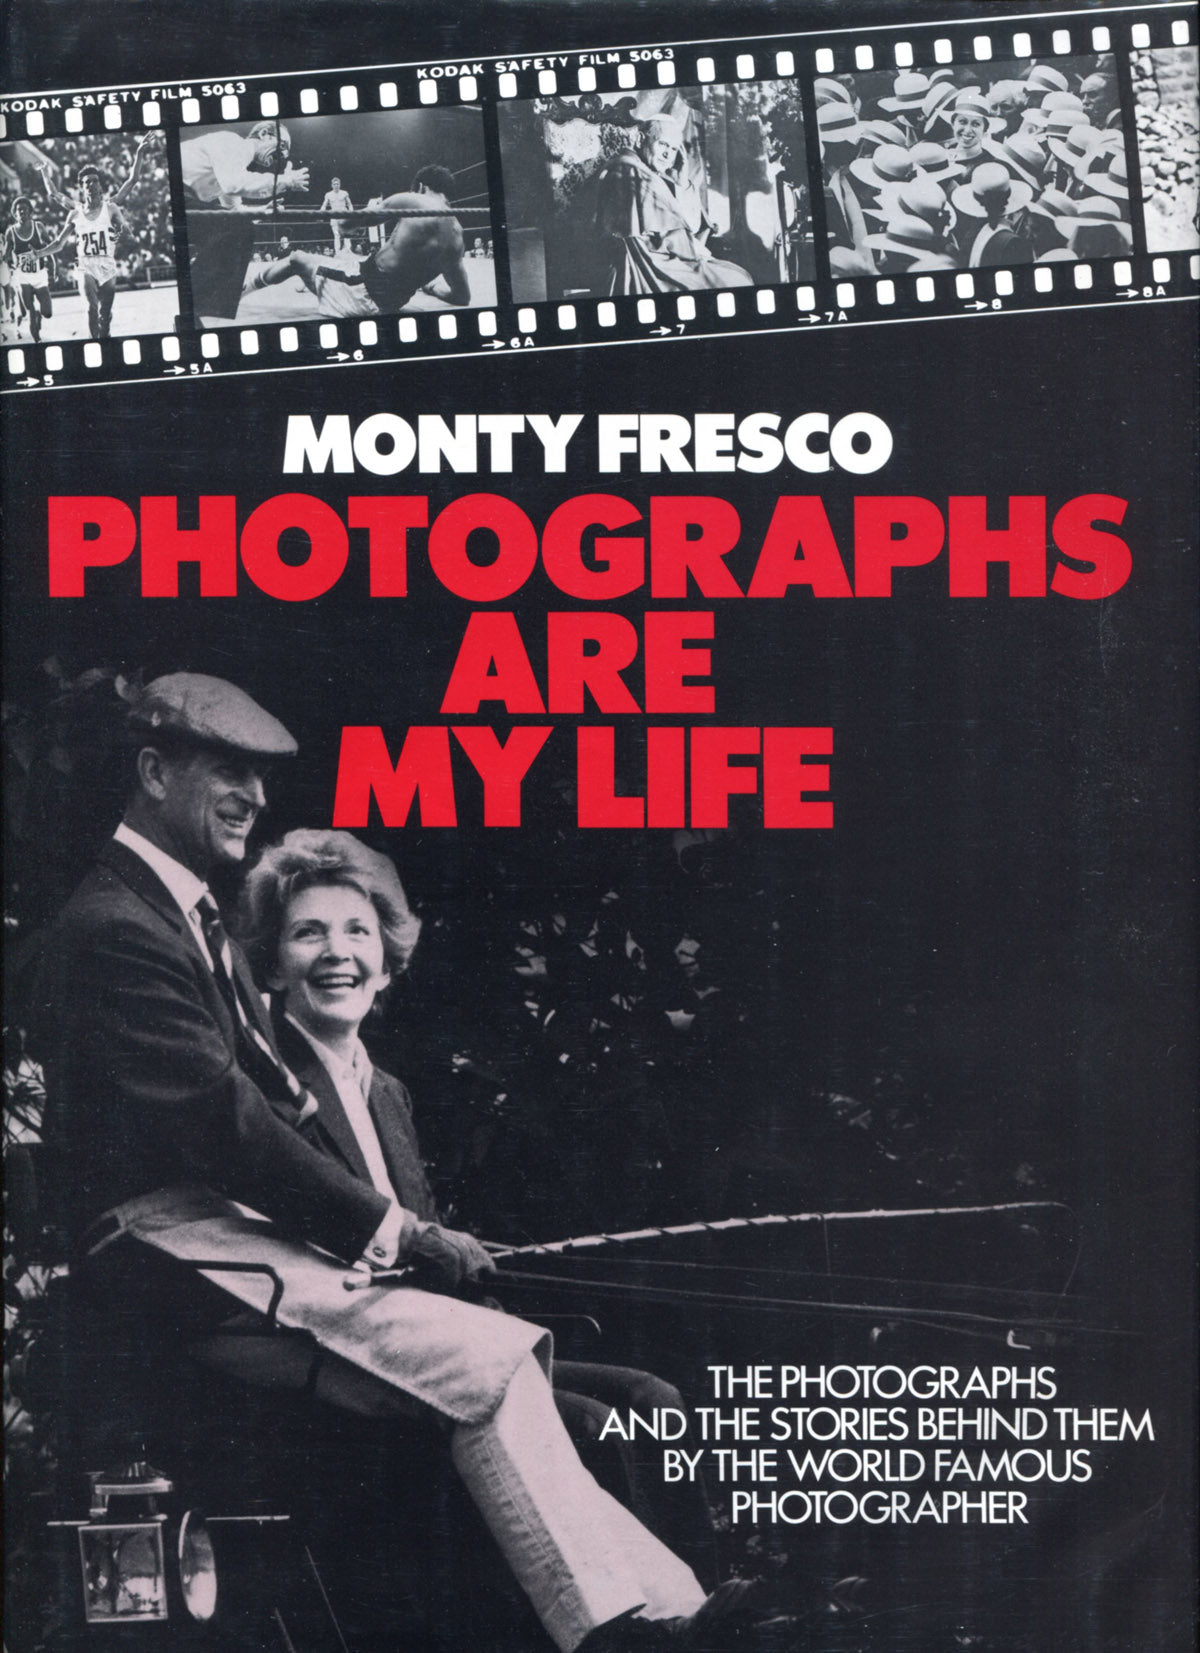 Fresco, Monty. Photographs Are My Life: The Photographs and the Stories Behind Them by the World Famous Photographer by Monty Fresco.